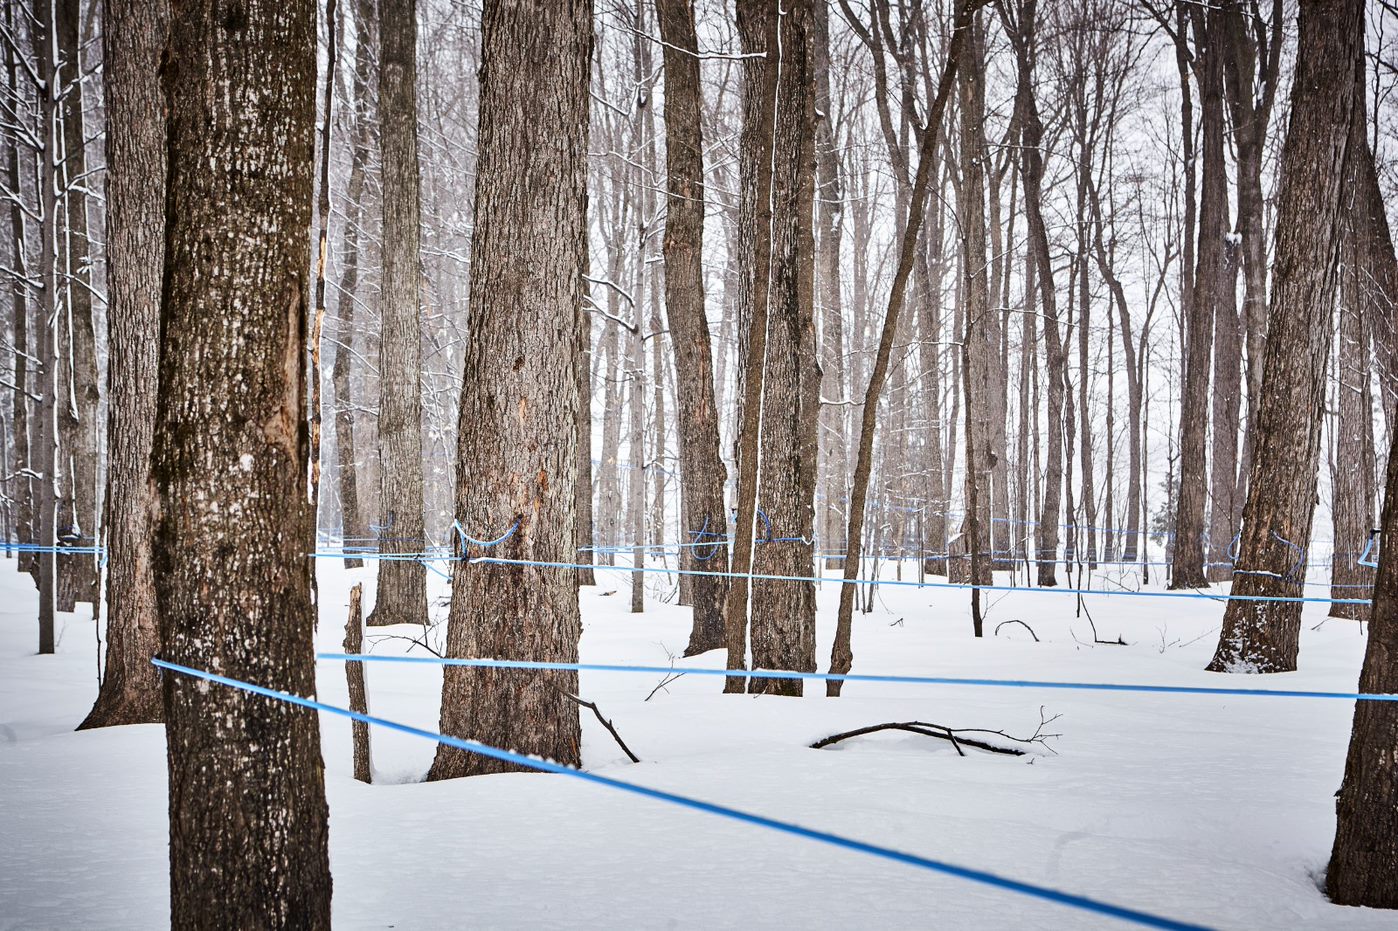 Maple trees being tapped during winter.